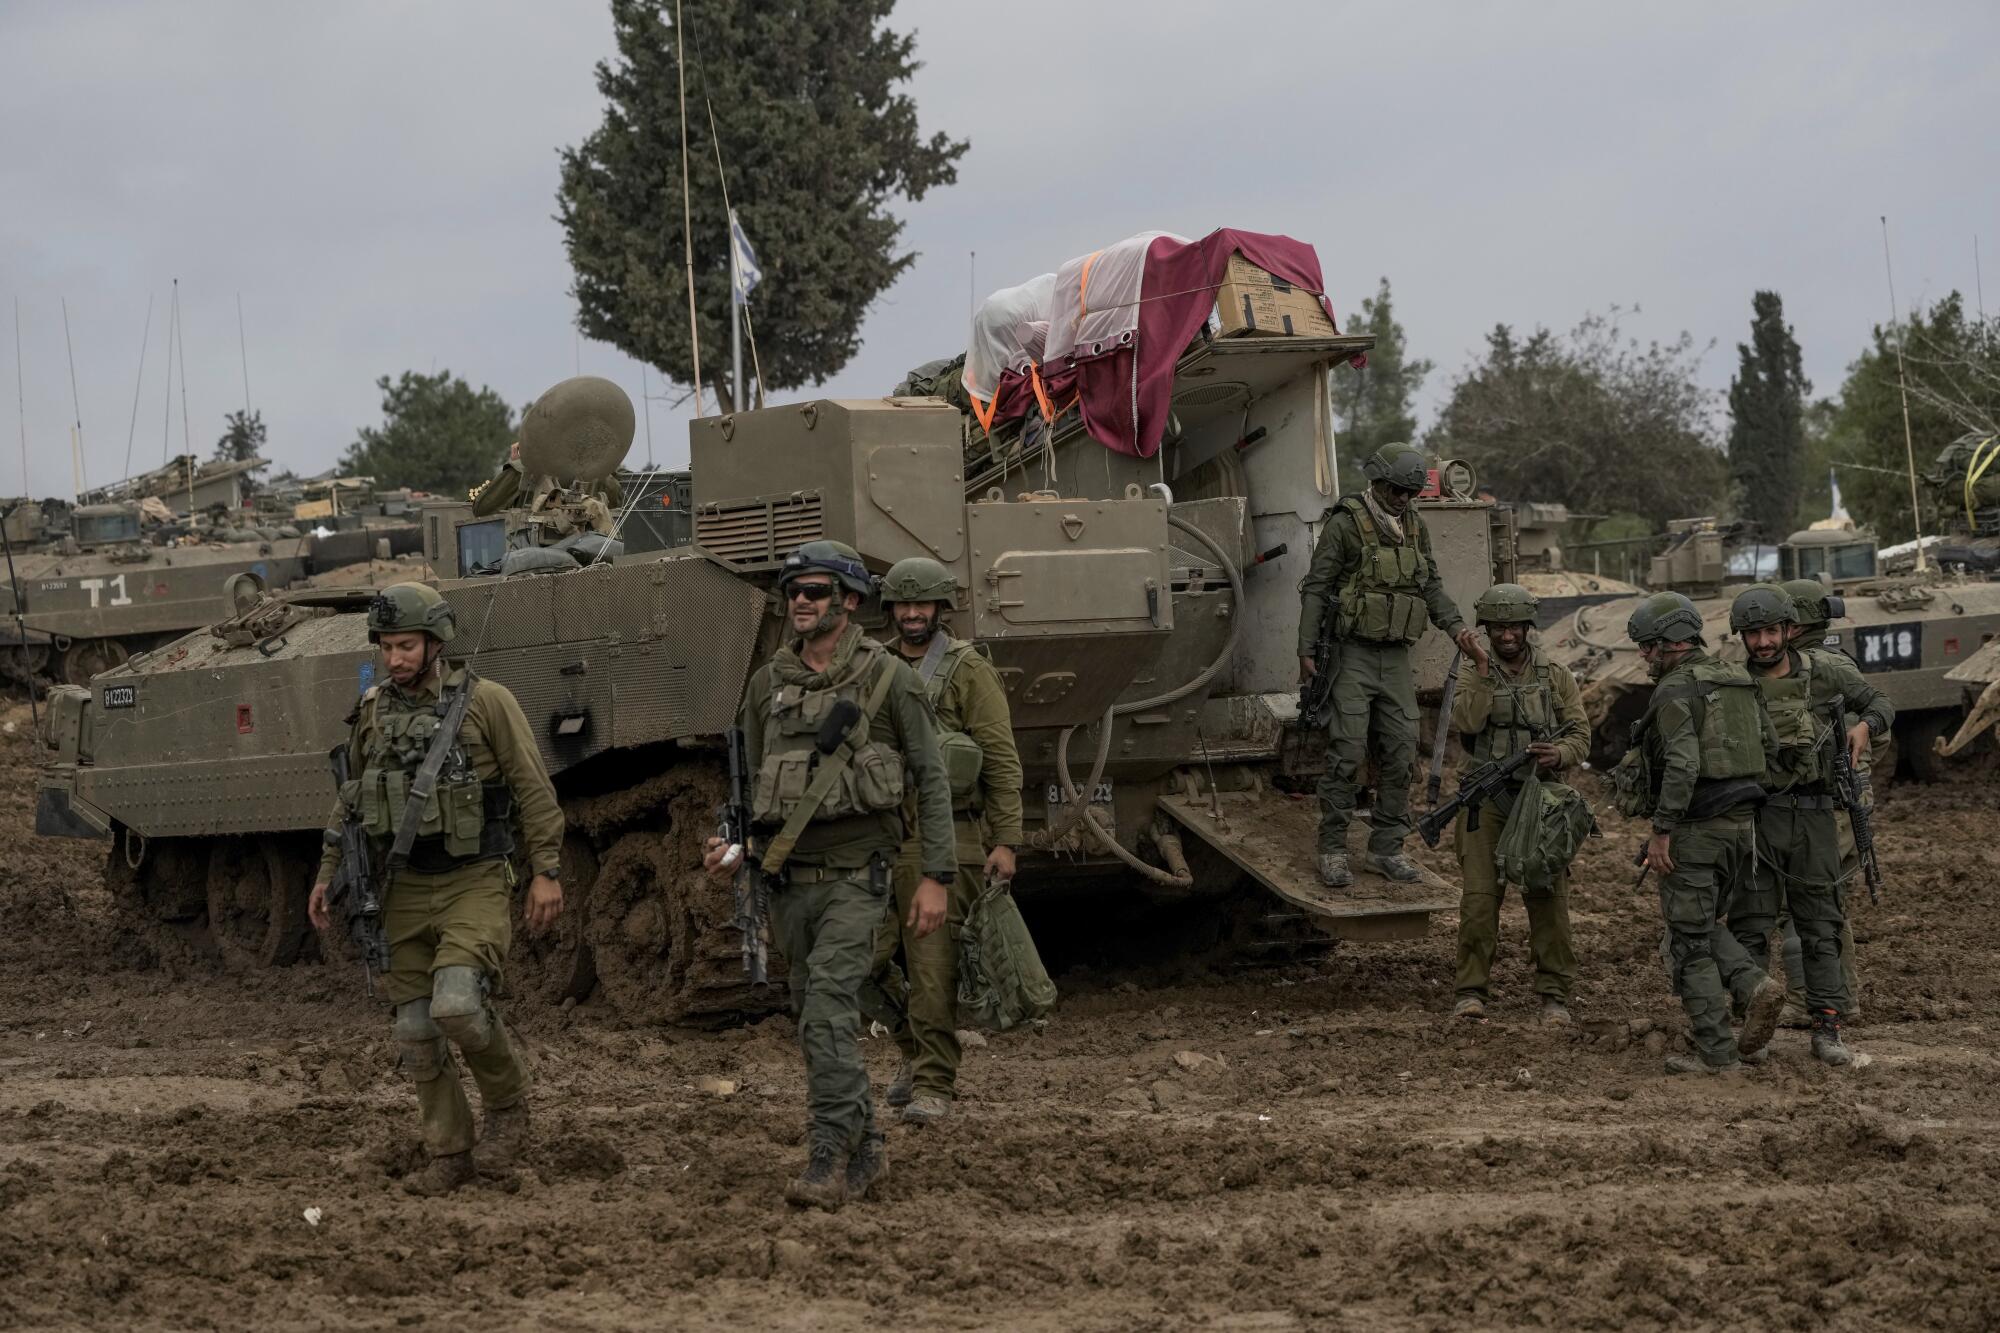 Israeli soldiers at a staging area near the Israeli-Gaza border